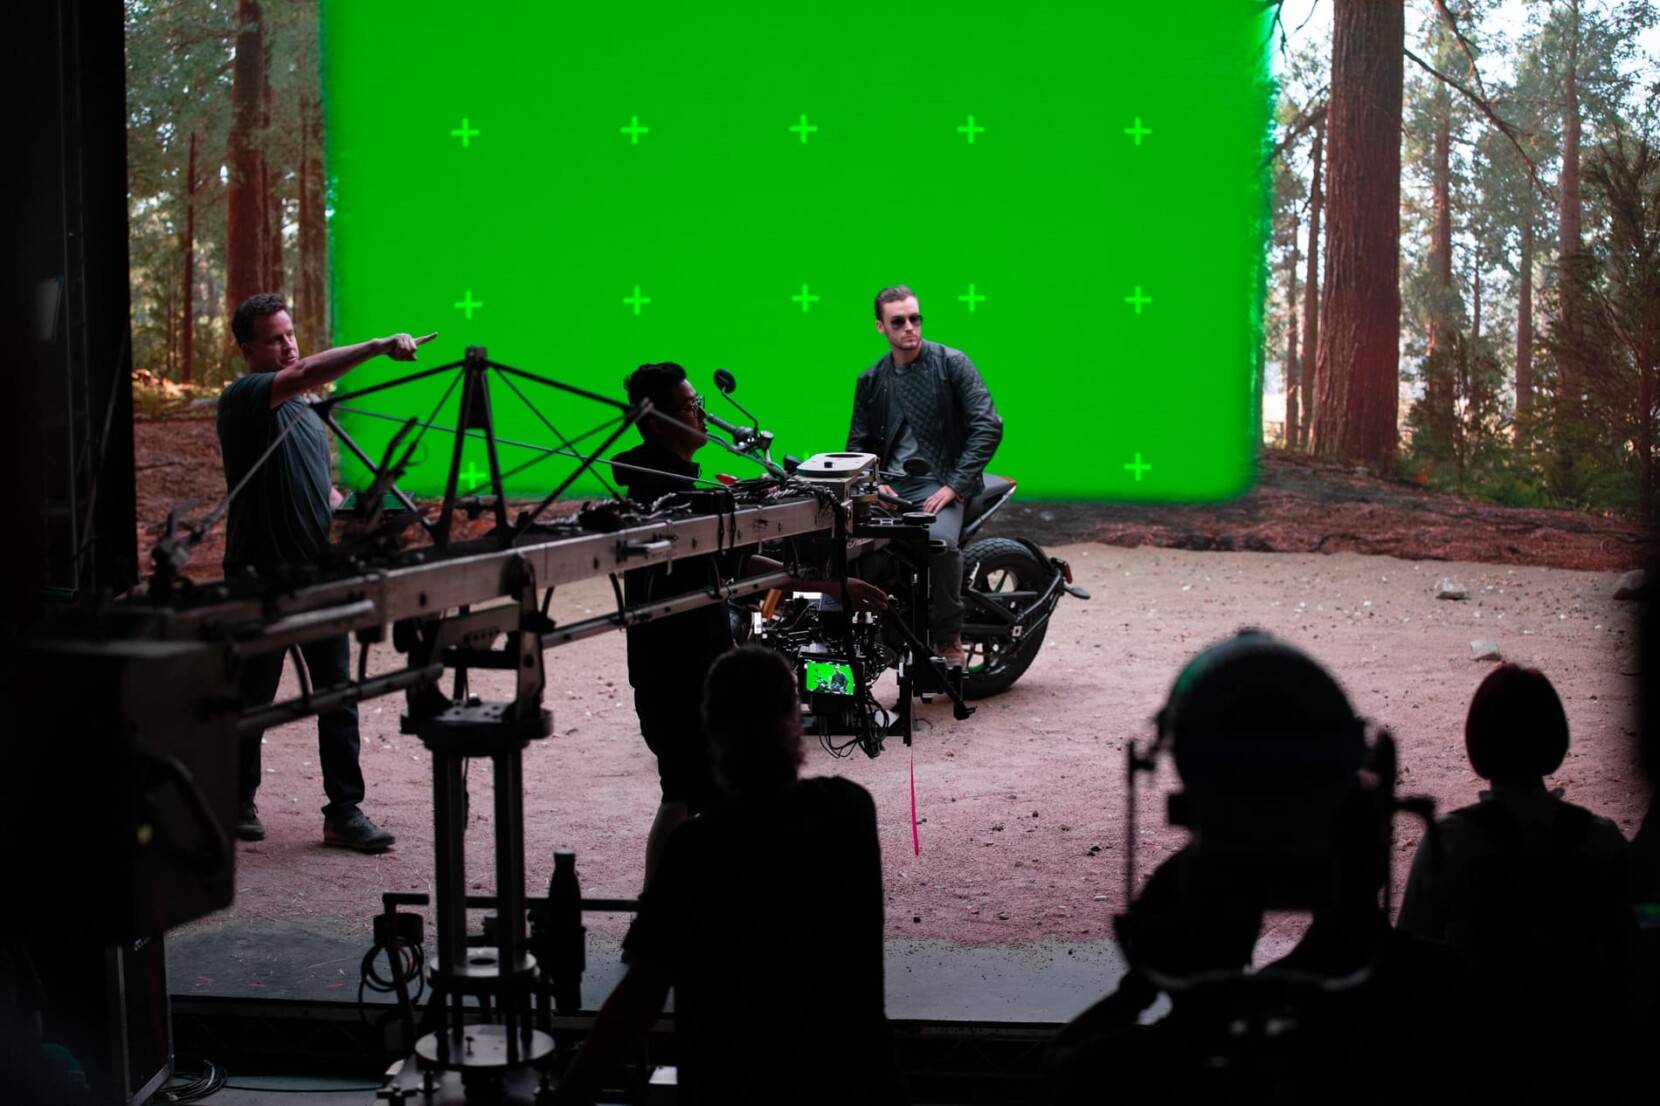 Actor working in front of green screen